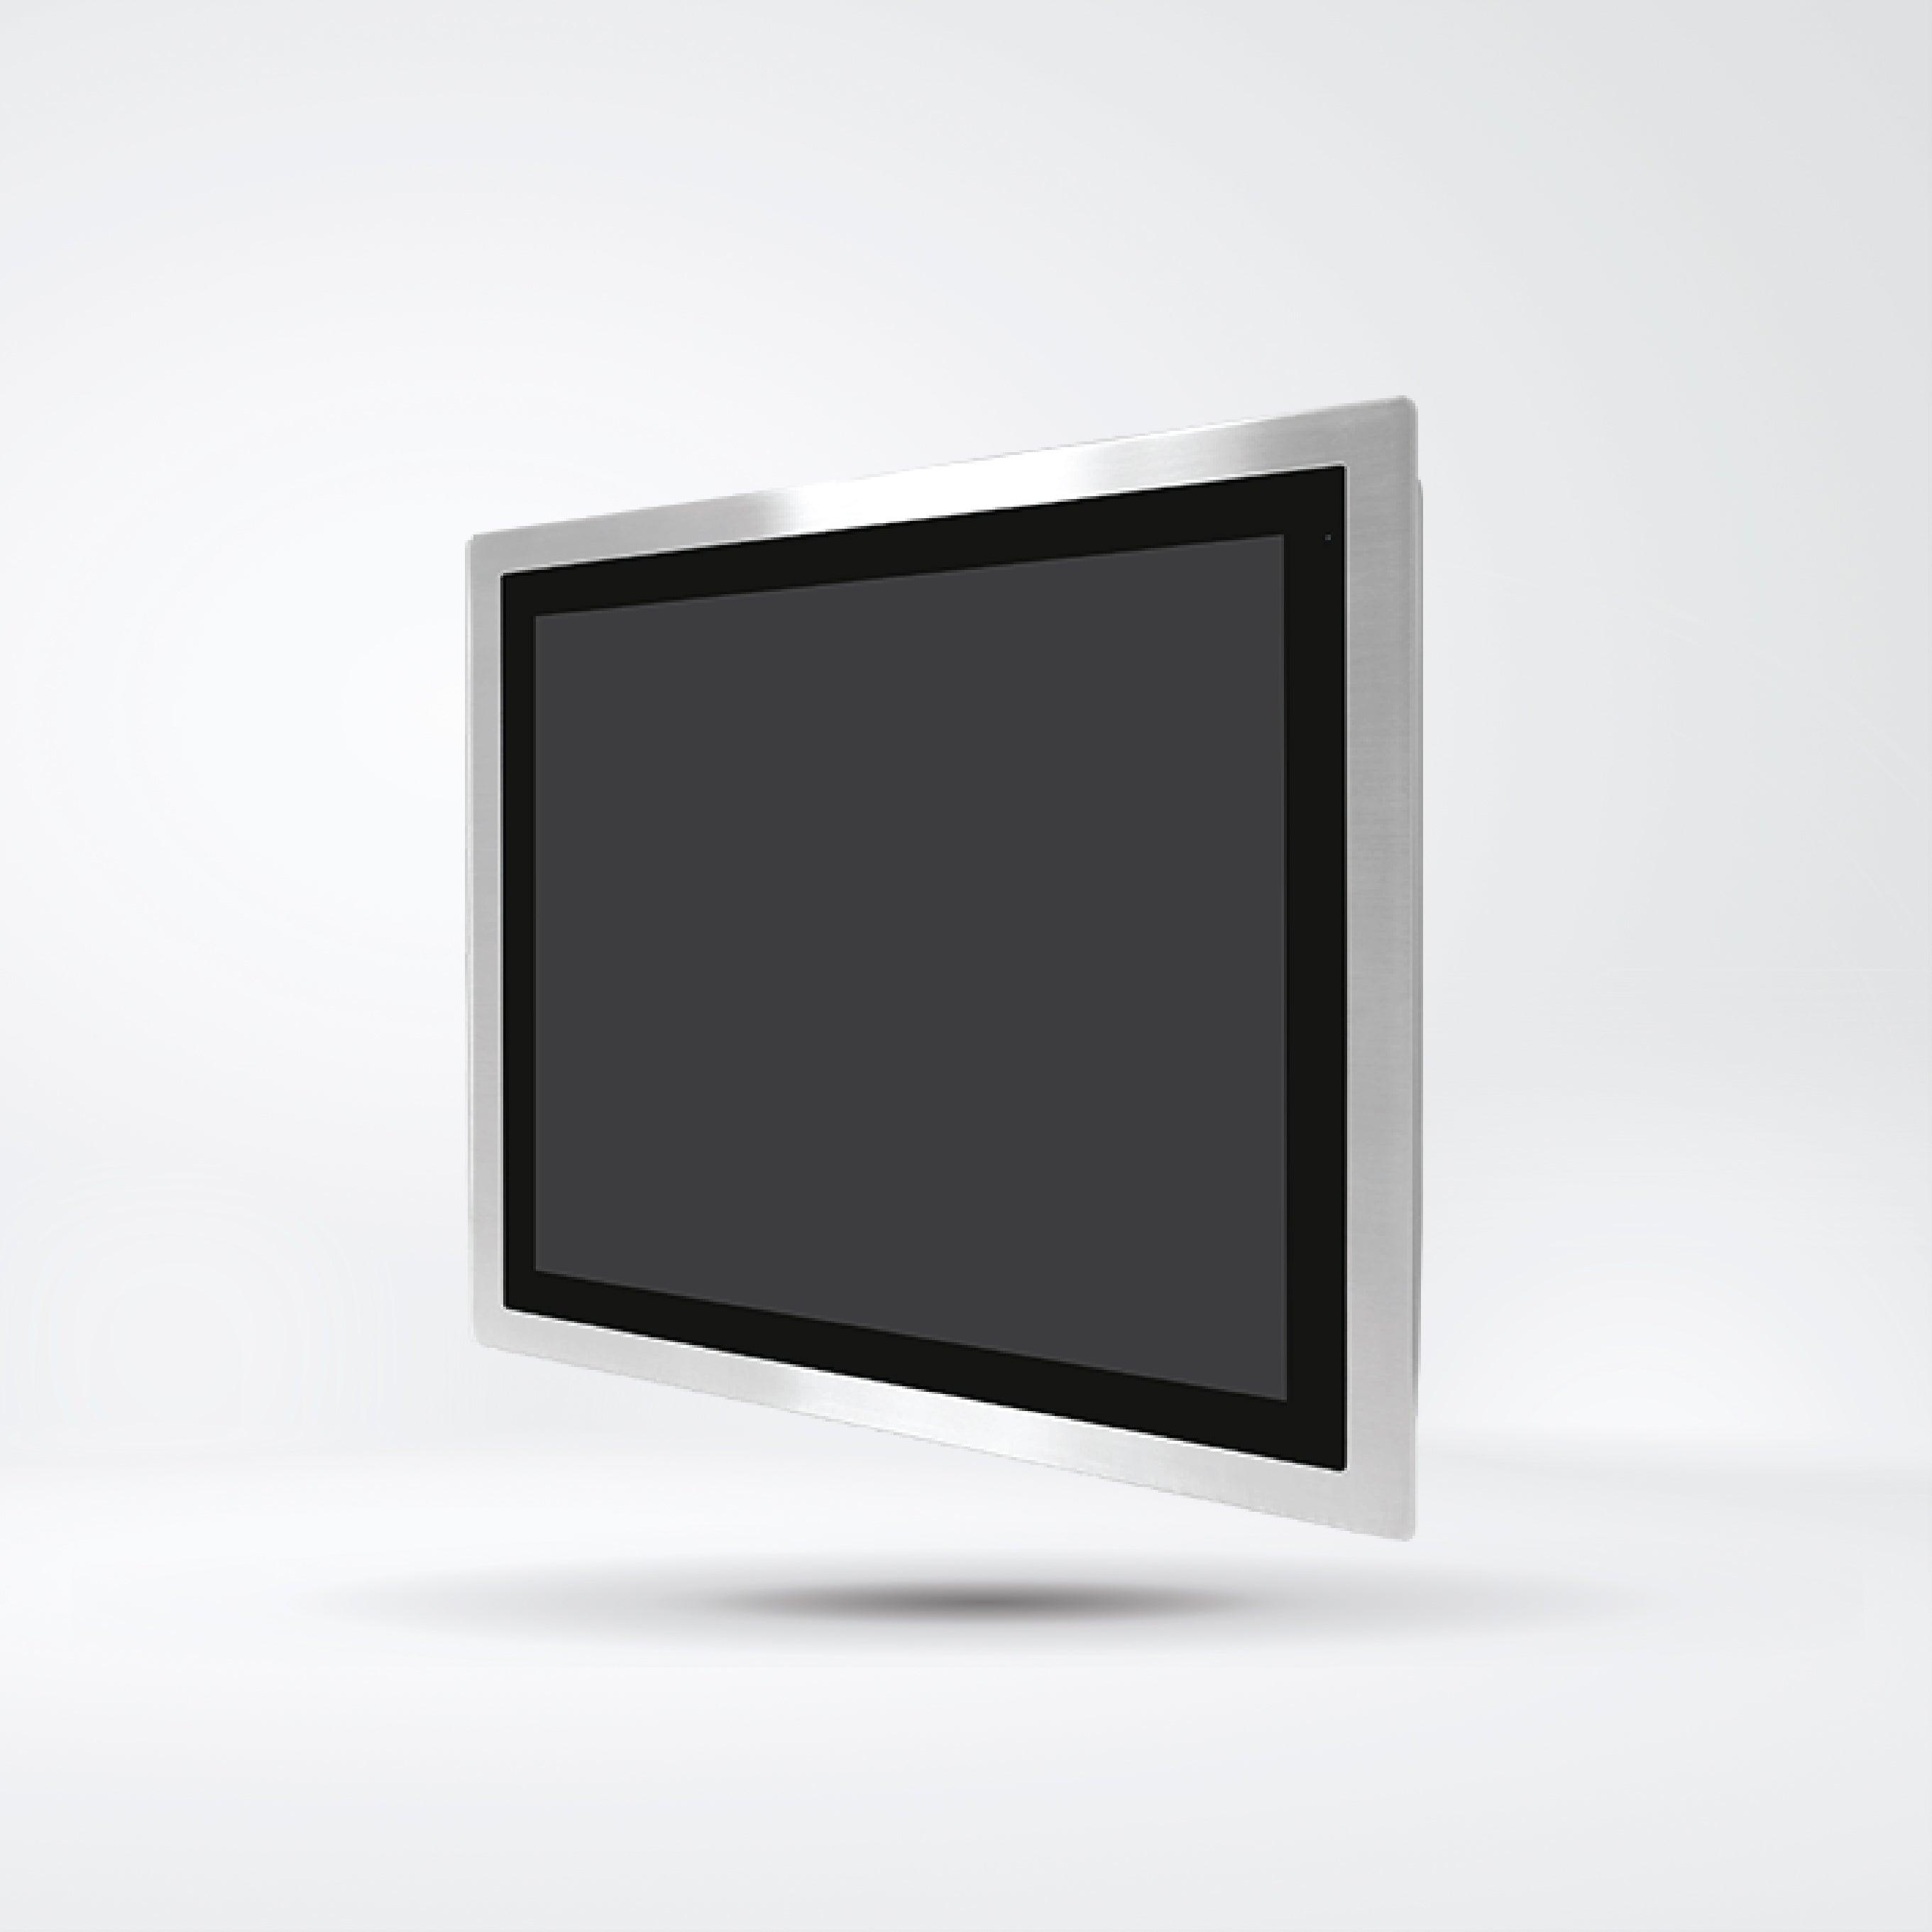 FABS-119GH 19” Flat Front Panel IP66 Stainless Chassis Display - Riverplus